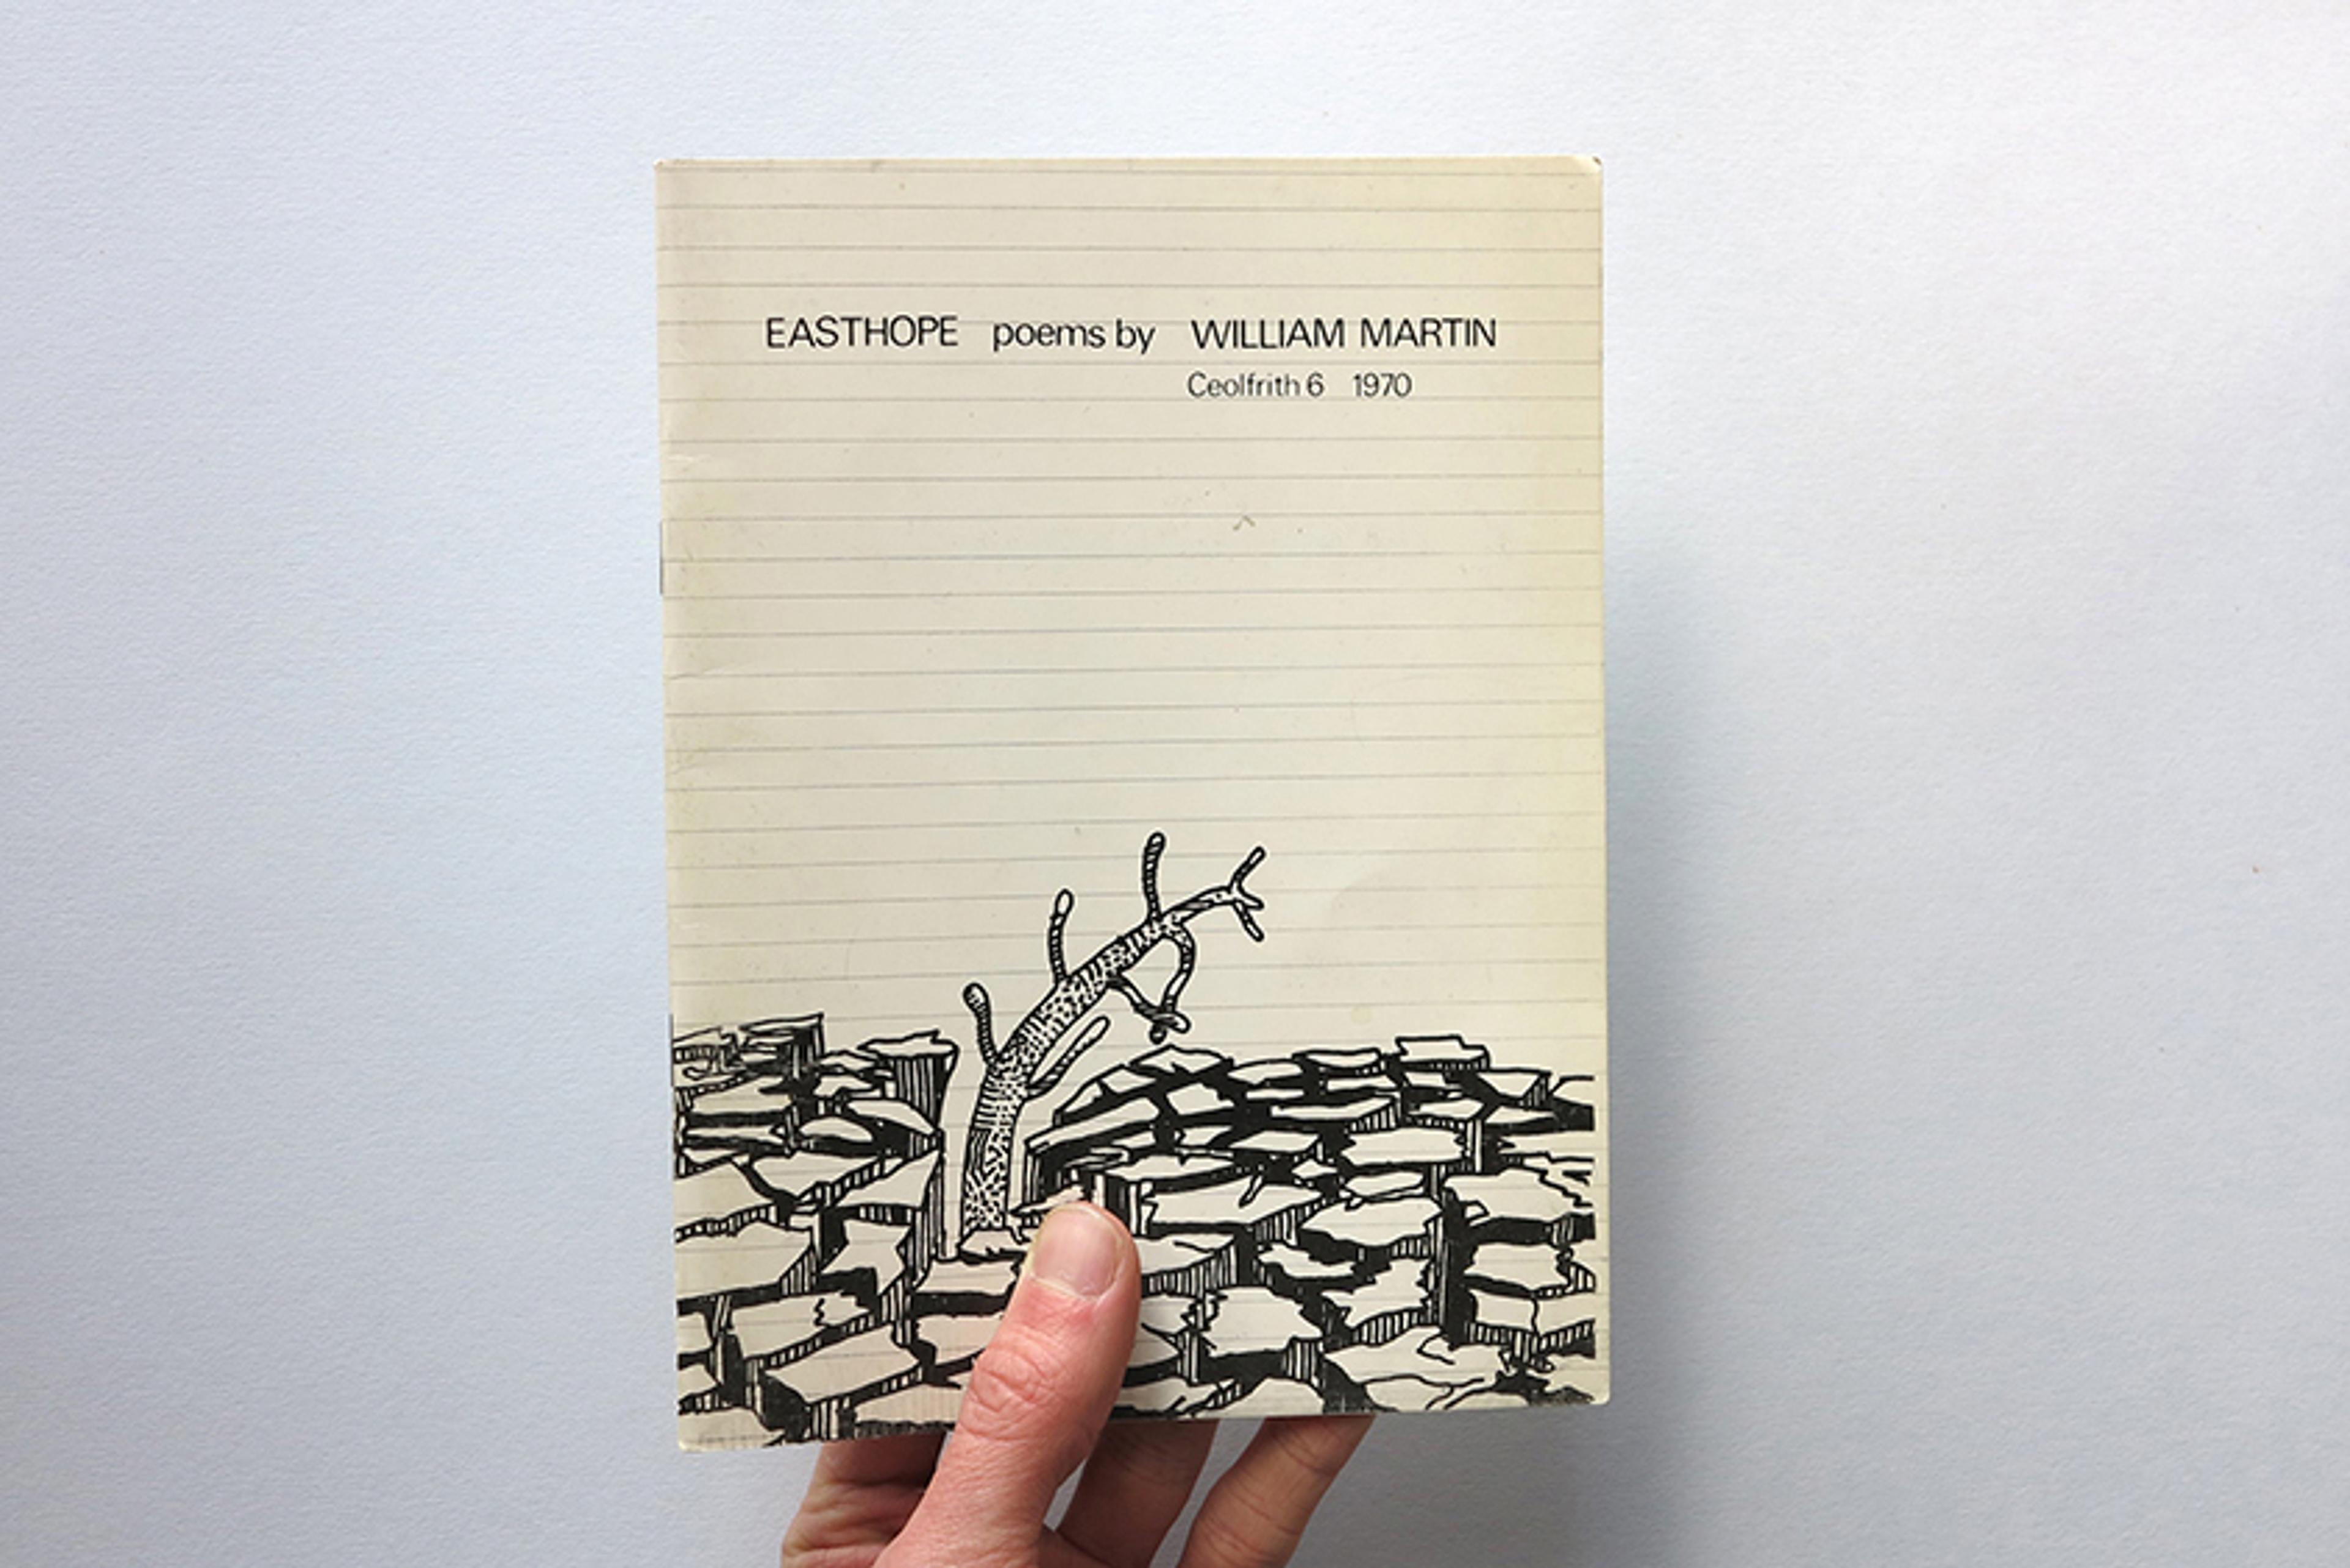 An image of the cover of William Martin's 1970 poetry collection 'Easthope'.